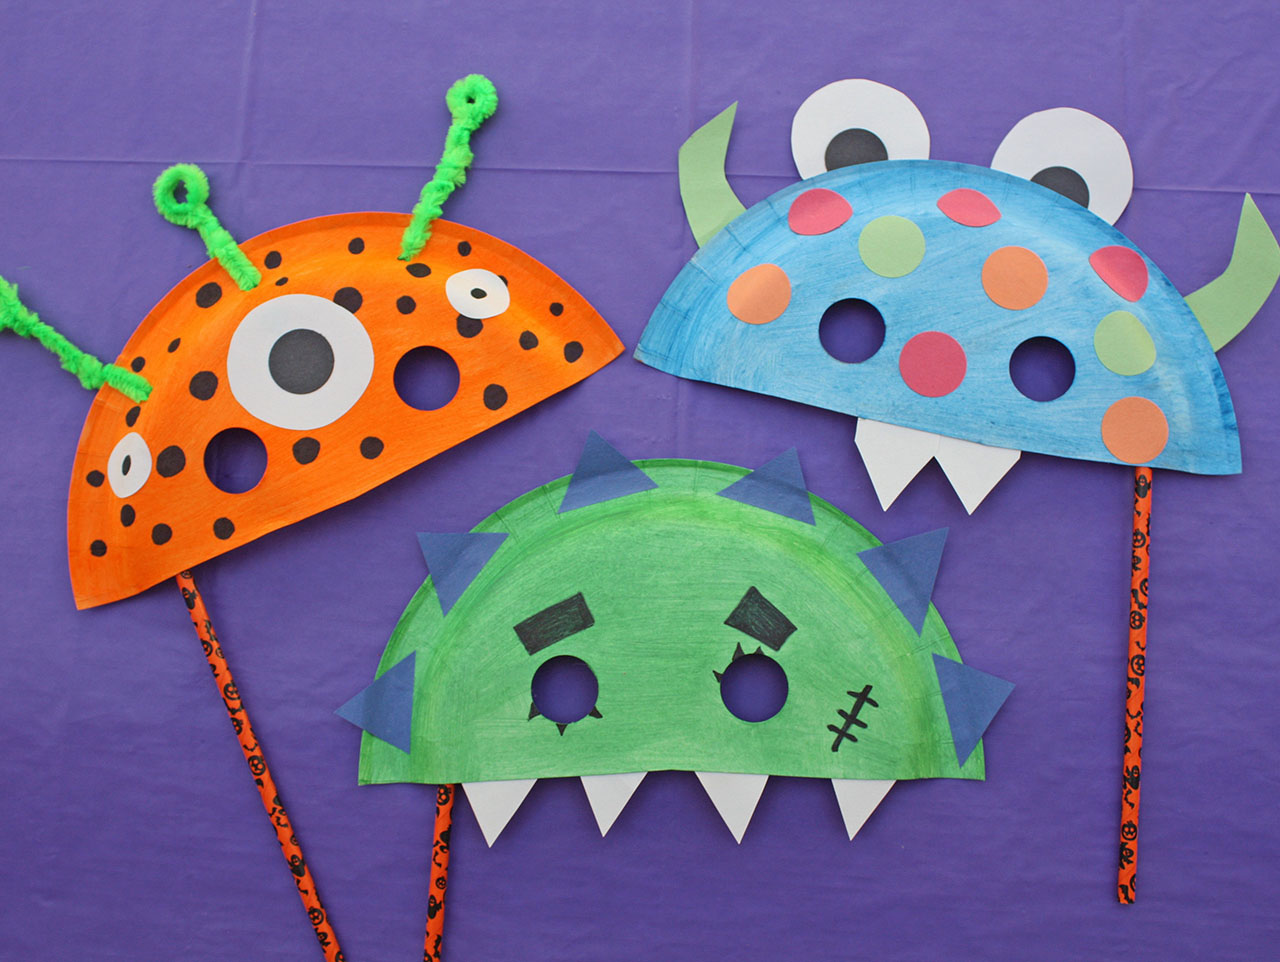 Hurricane crafts: how to make a paper mask